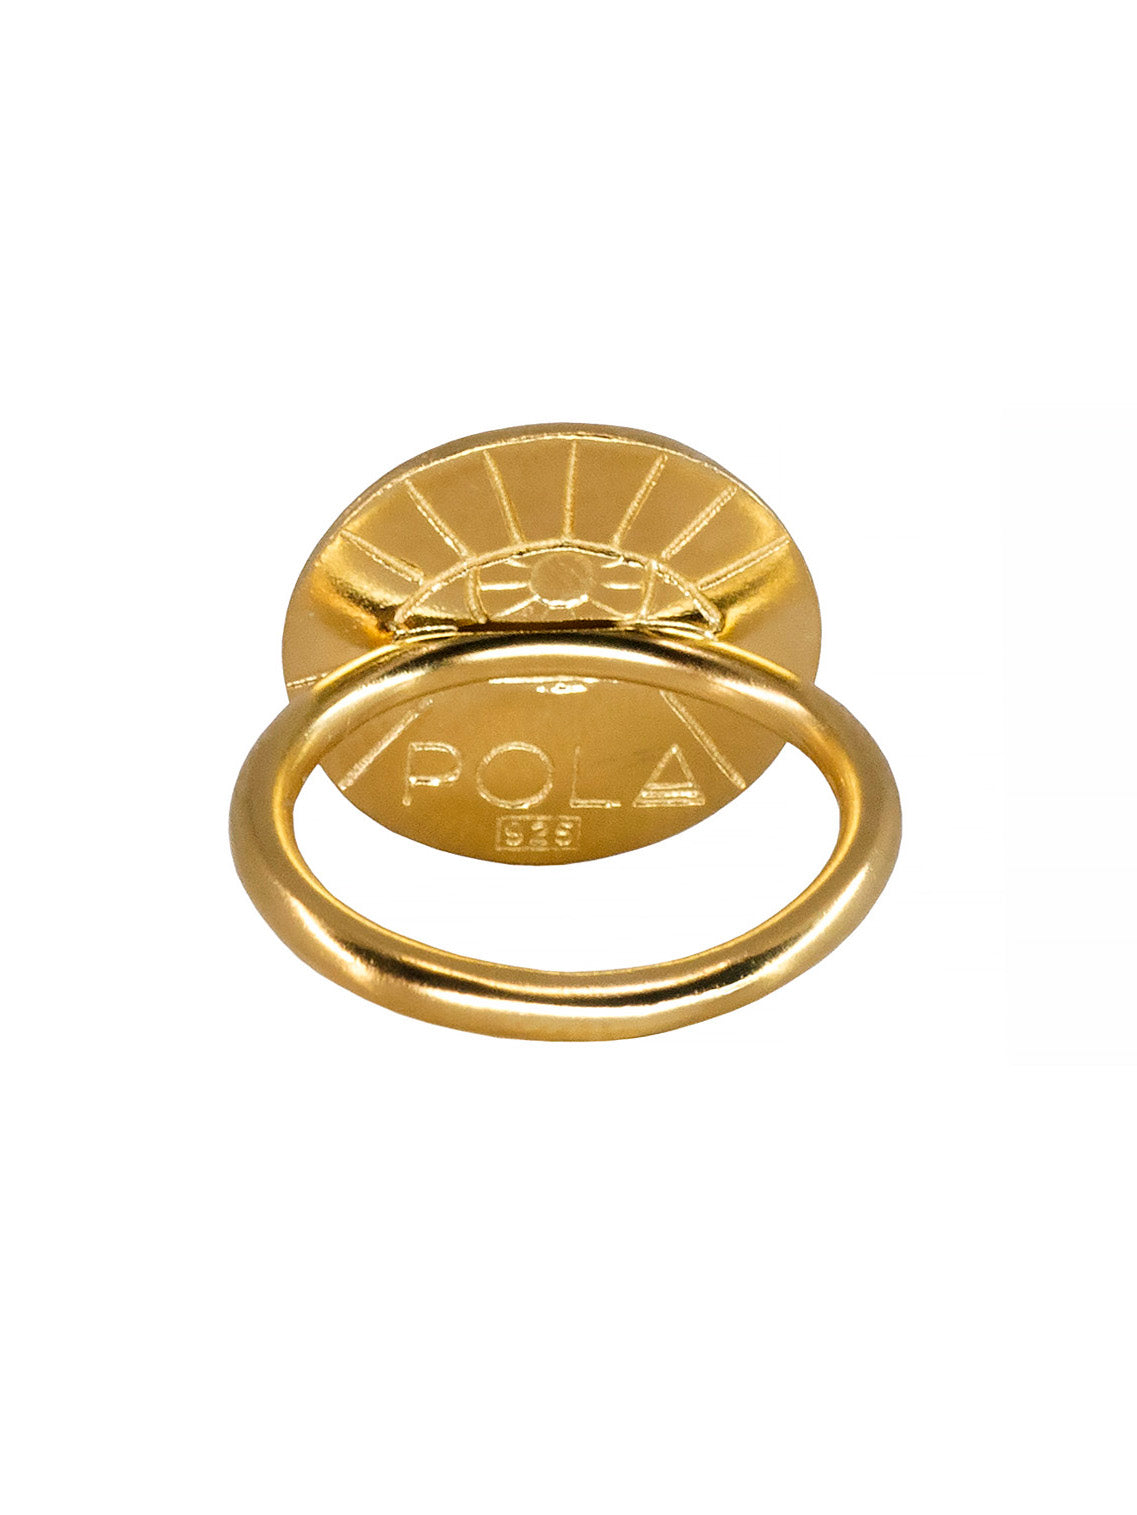 Blood type A Positive Ring. Gold plated Sterling Silver